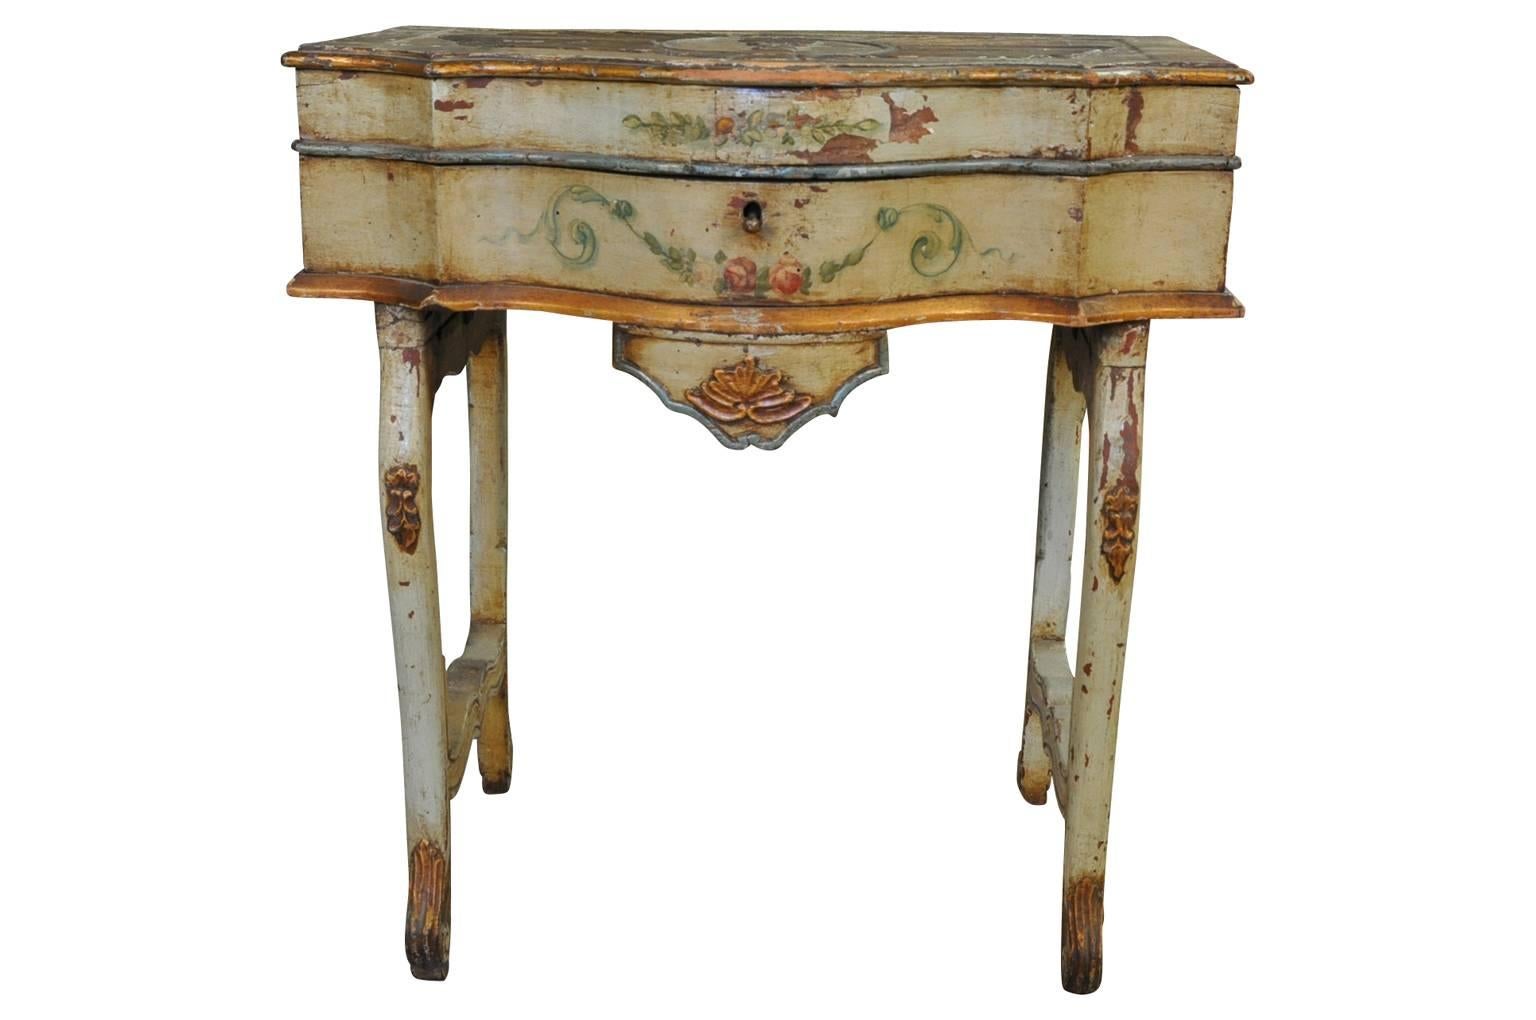 Painted Outstanding Italian, 17th Century Traveling Prayer Table